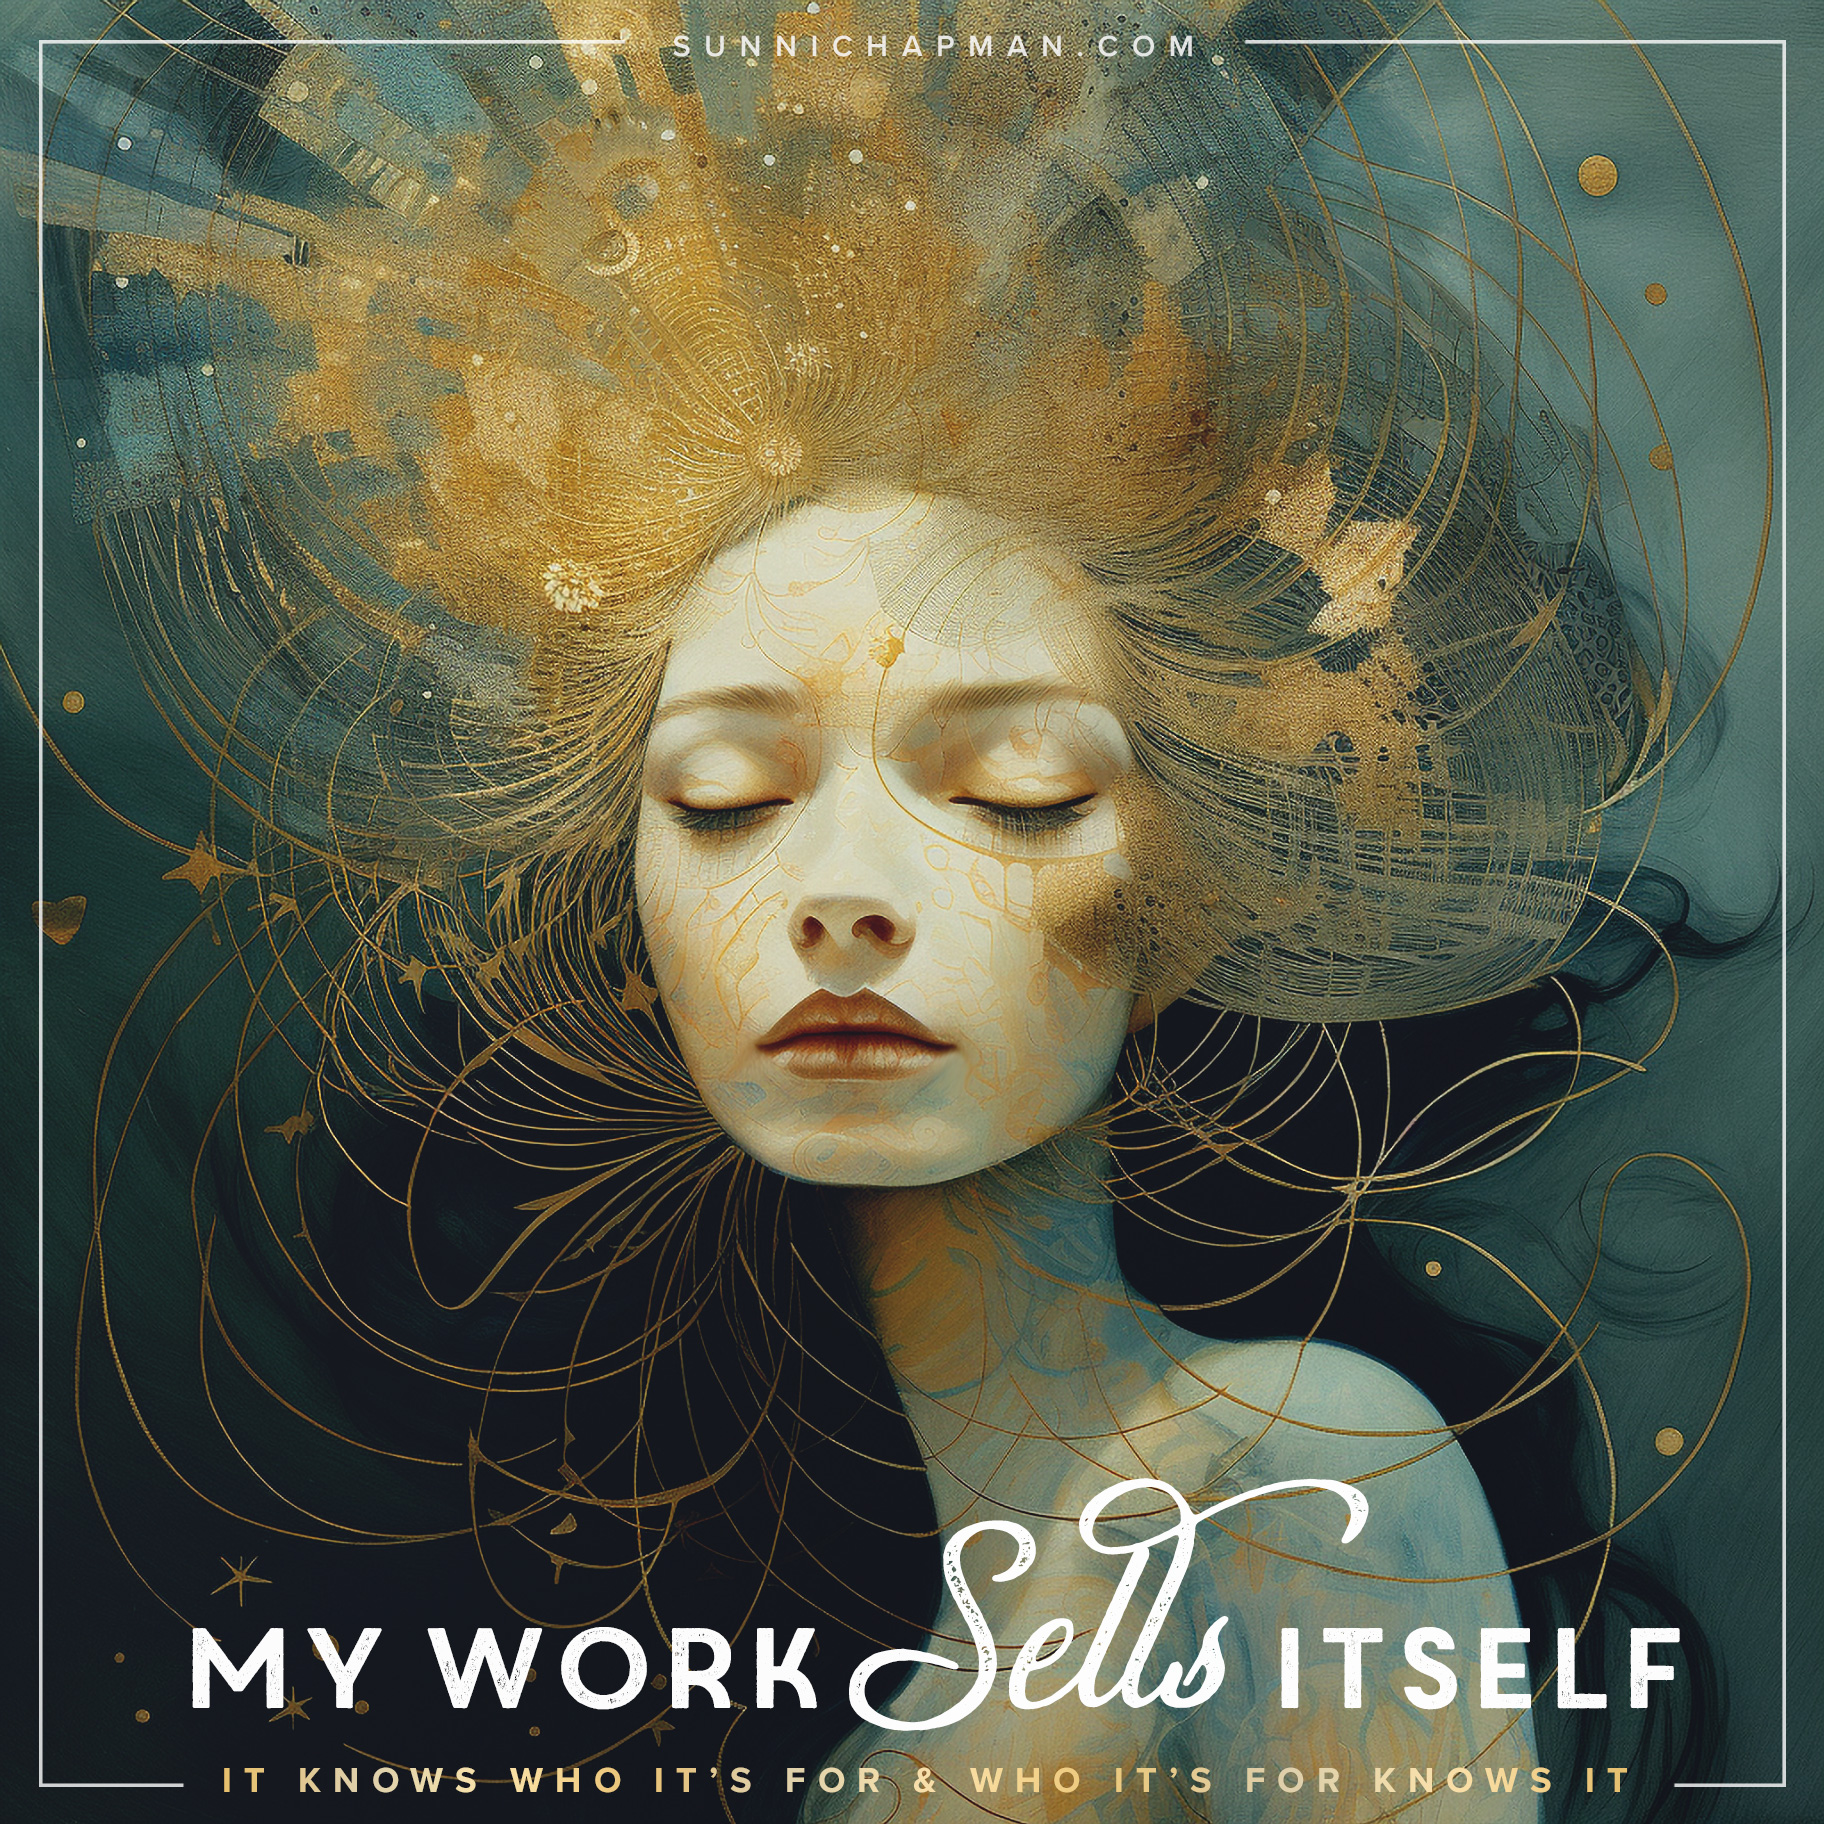 Artistic illustration featuring a serene woman's face, eyes closed, with a radiant gold halo intricately detailed with patterns and musical notes, suggesting a celestial or dreamlike quality. The text 'My Work Sells Itself' is prominently displayed, with a subtitle 'It knows who it's for & who it's for knows it', implying a confident and mystical connection between the art and its audience.